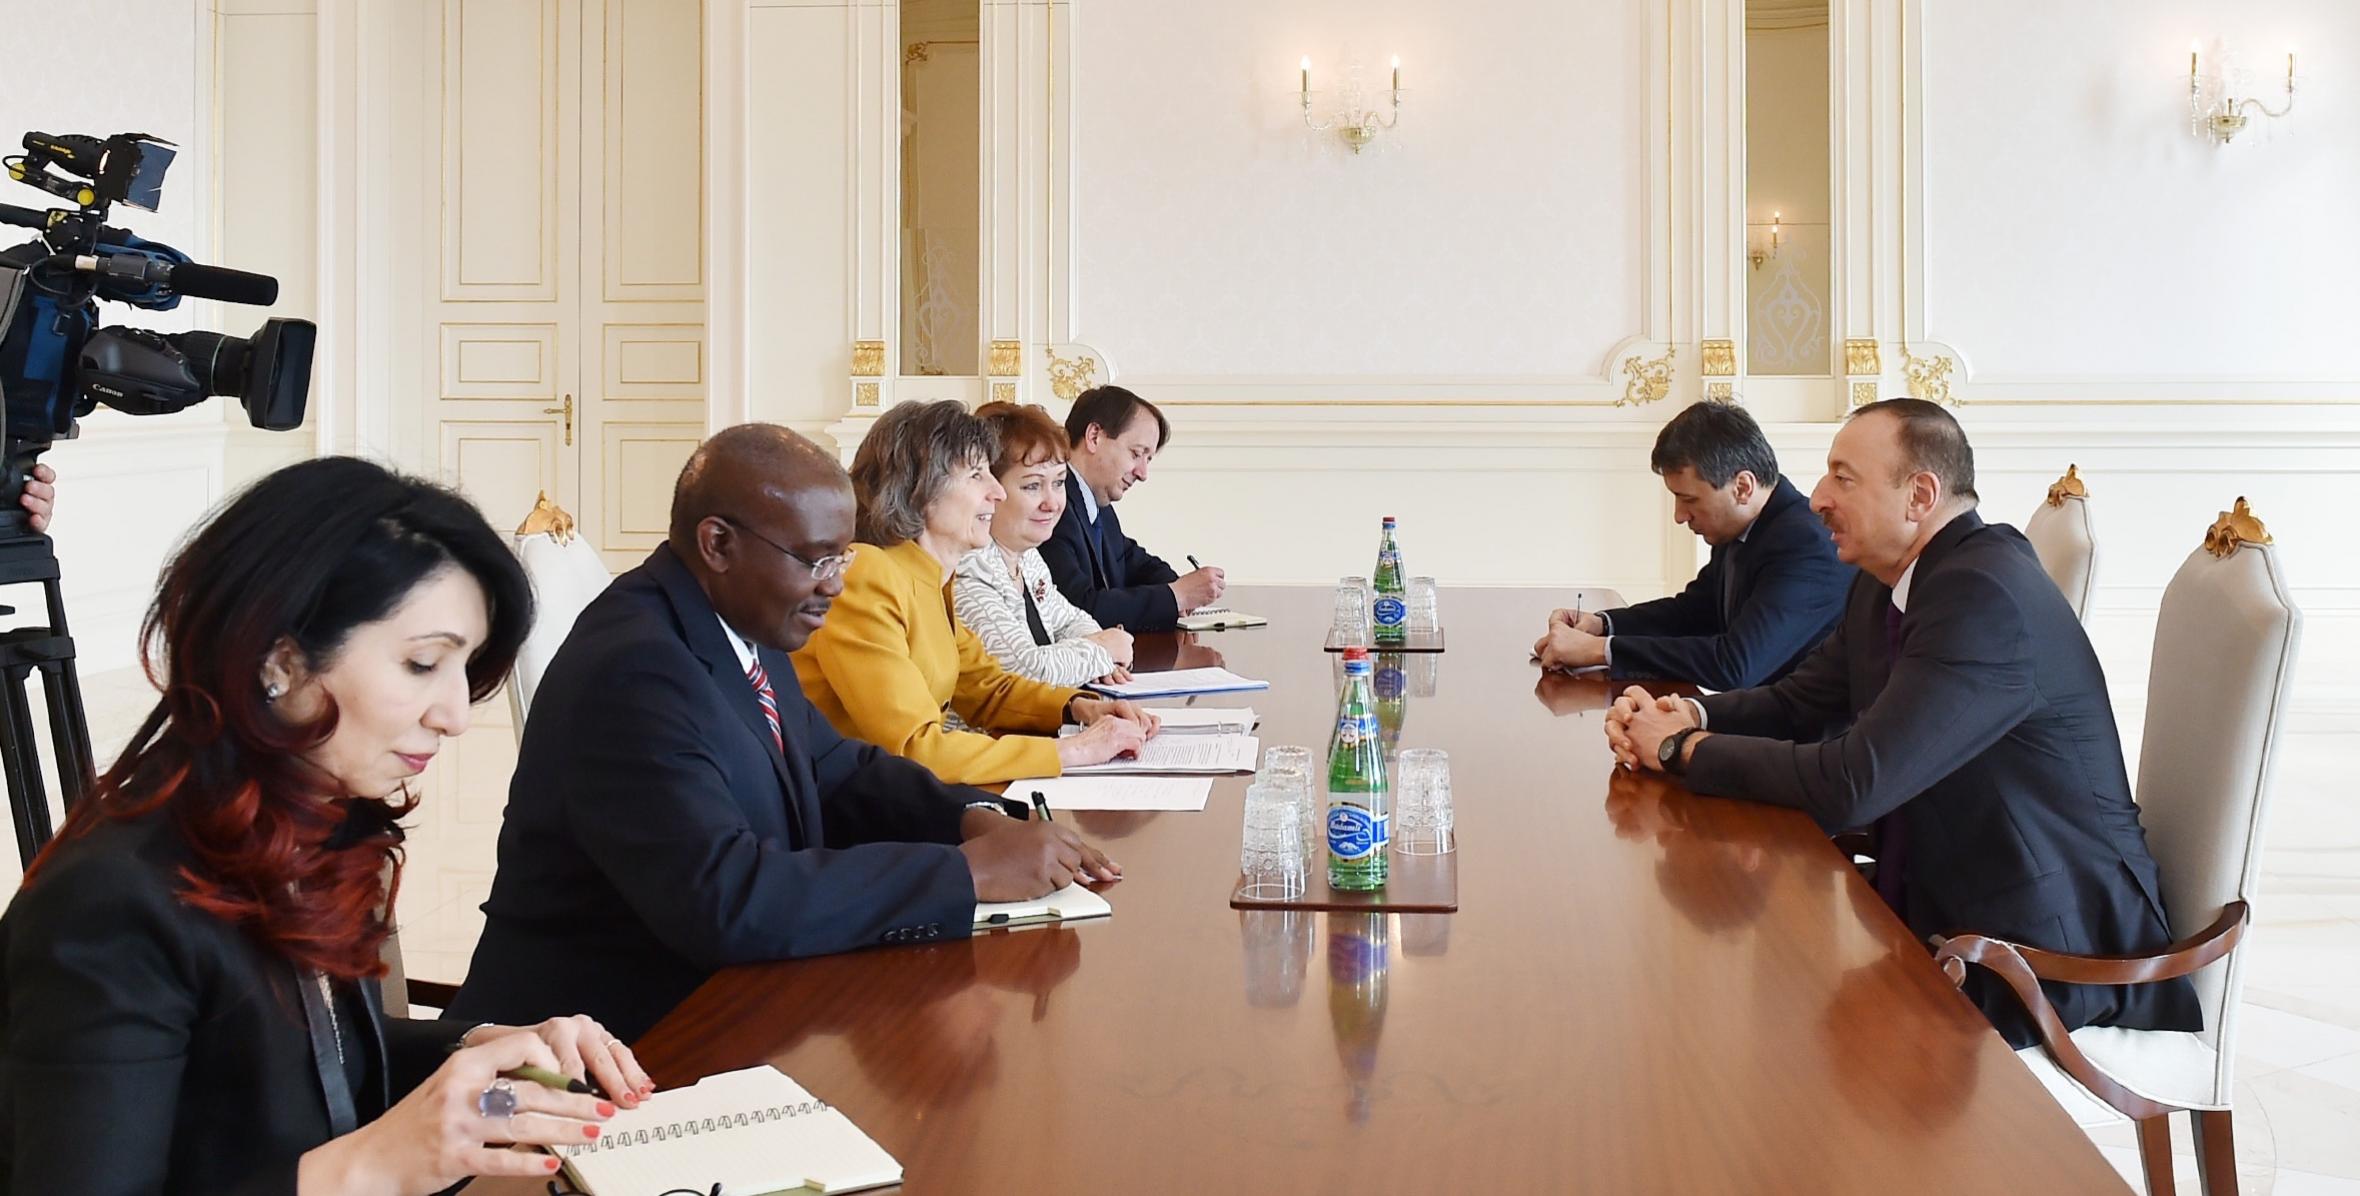 Ilham Aliyev received a delegation led by the World Bank’s Vice President for Europe and Central Asia